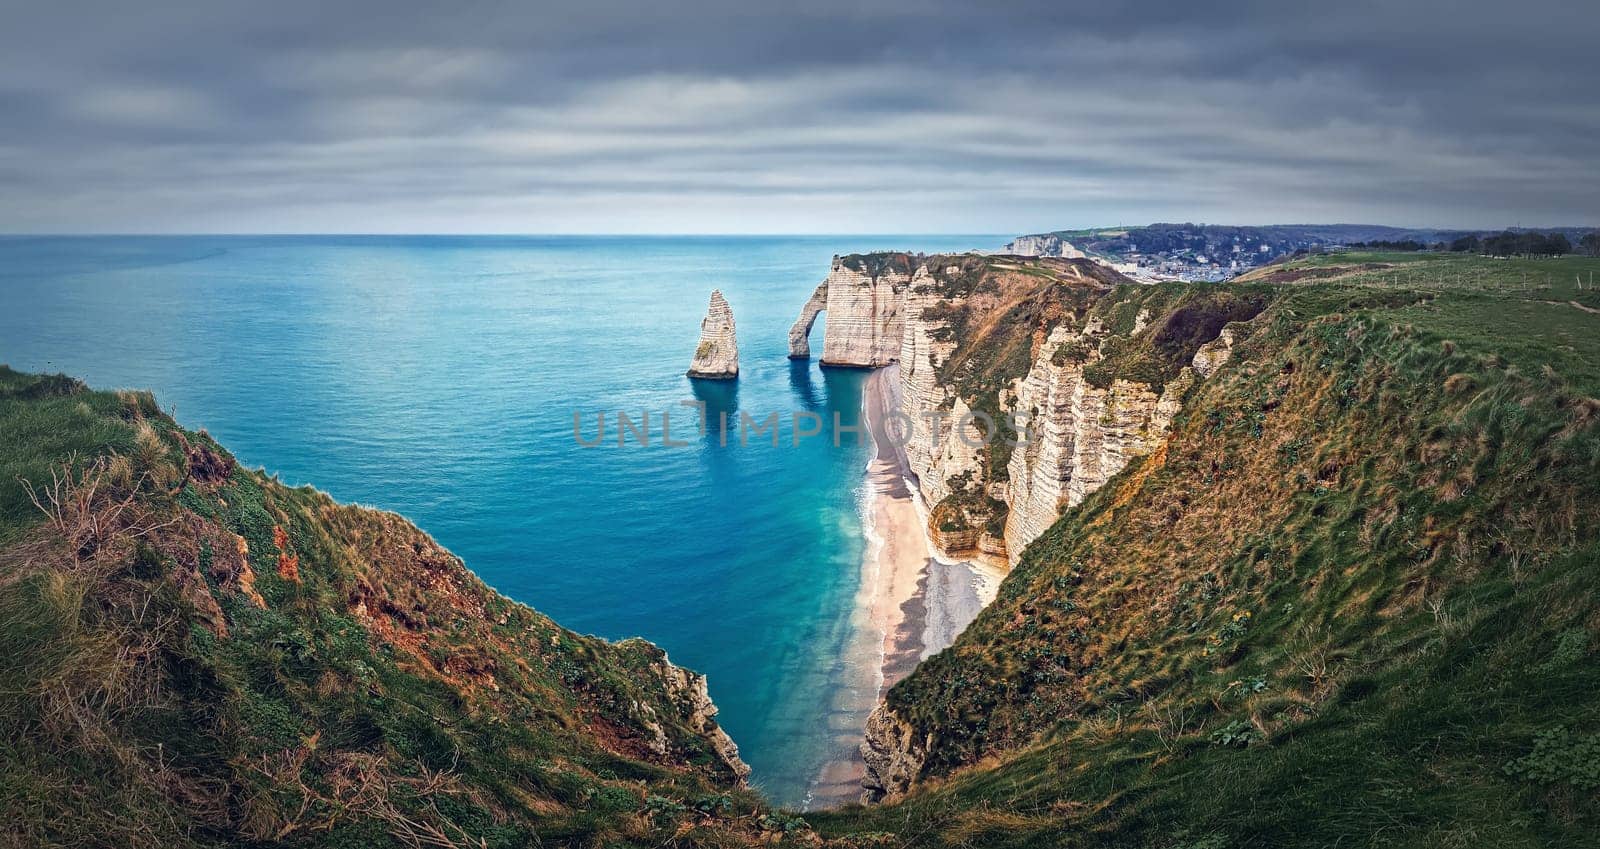 Falaise d'Aval limestone cliffs washed by La Manche channel waters. Beautiful coastline panorama with view to the famous rock Aiguille of Etretat in Normandy, France